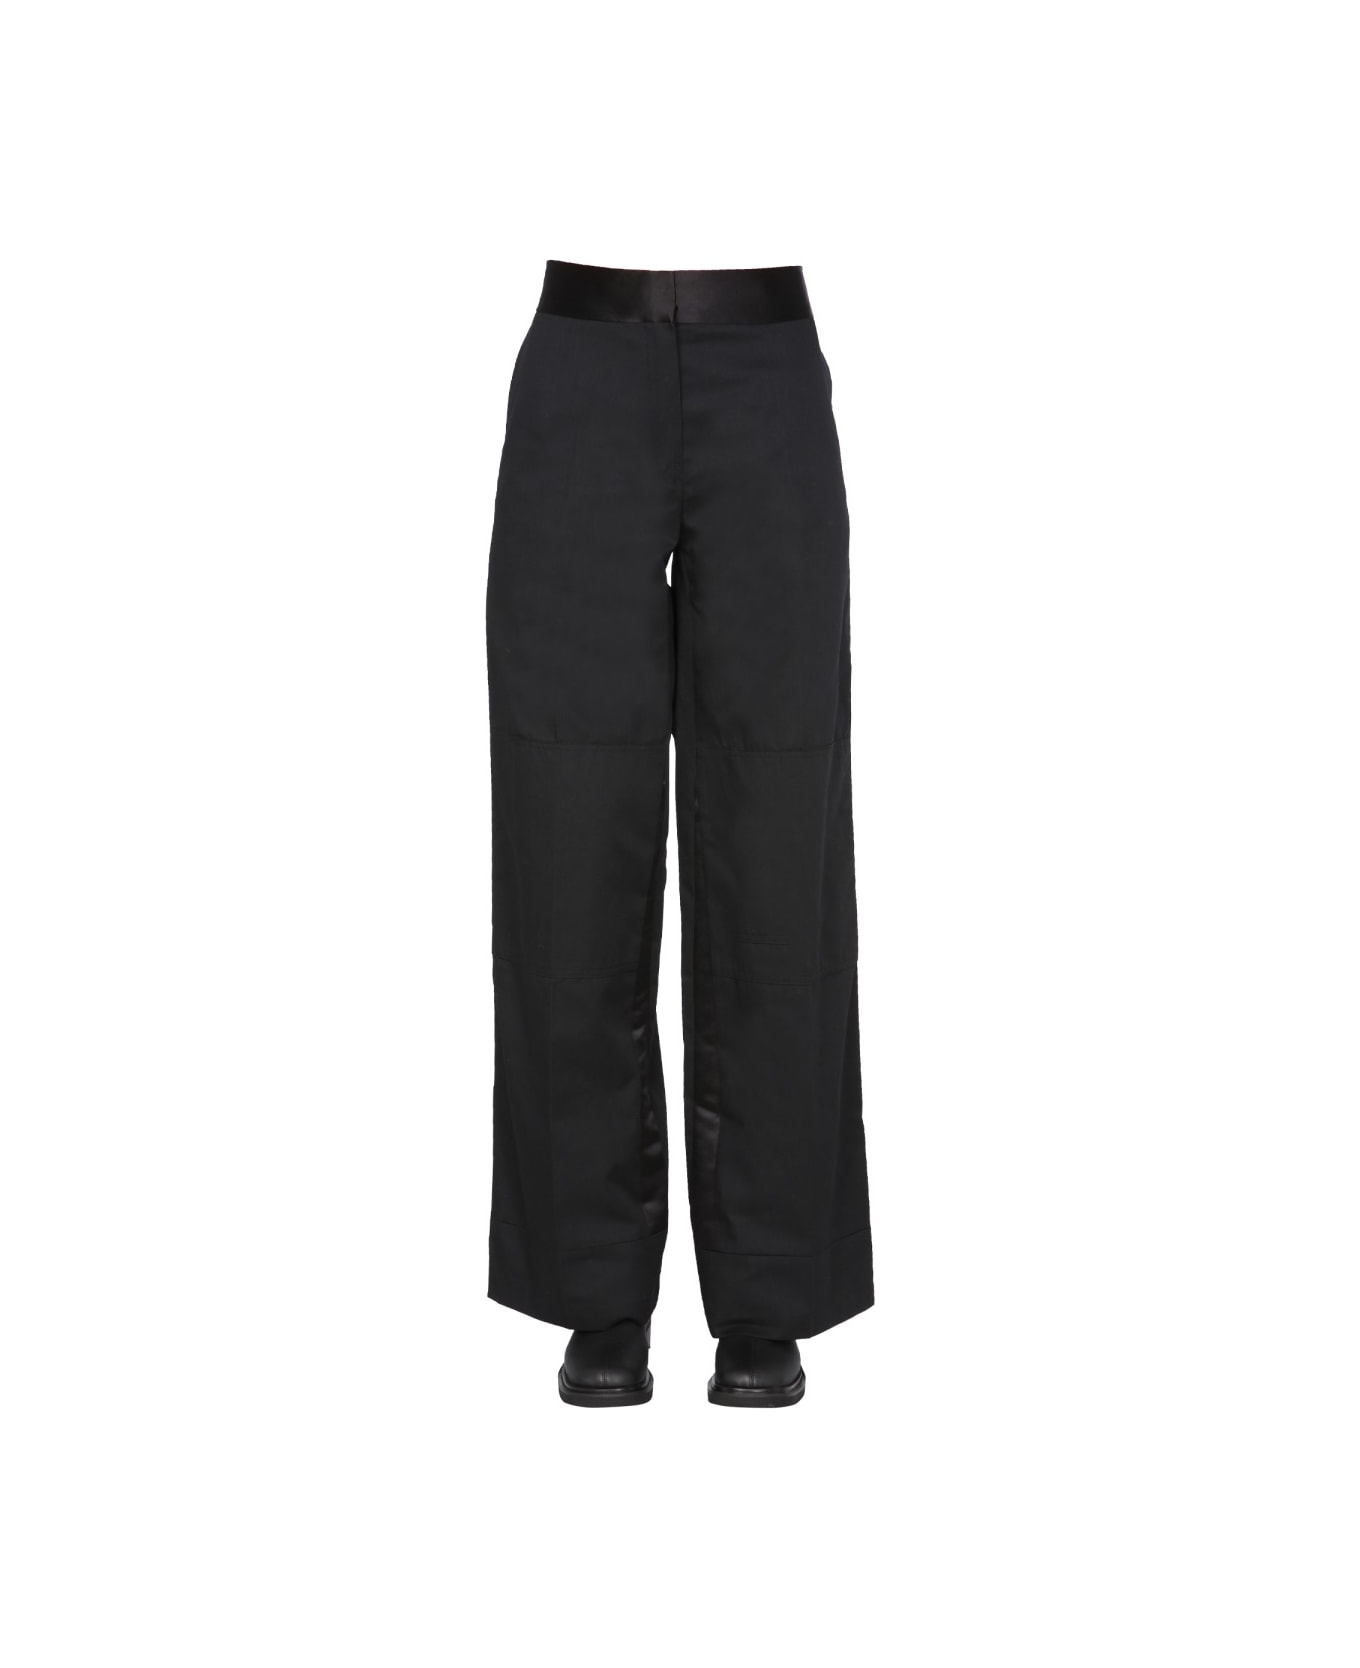 Raf Simons "ceremonial Worker" Trousers - BLACK ボトムス